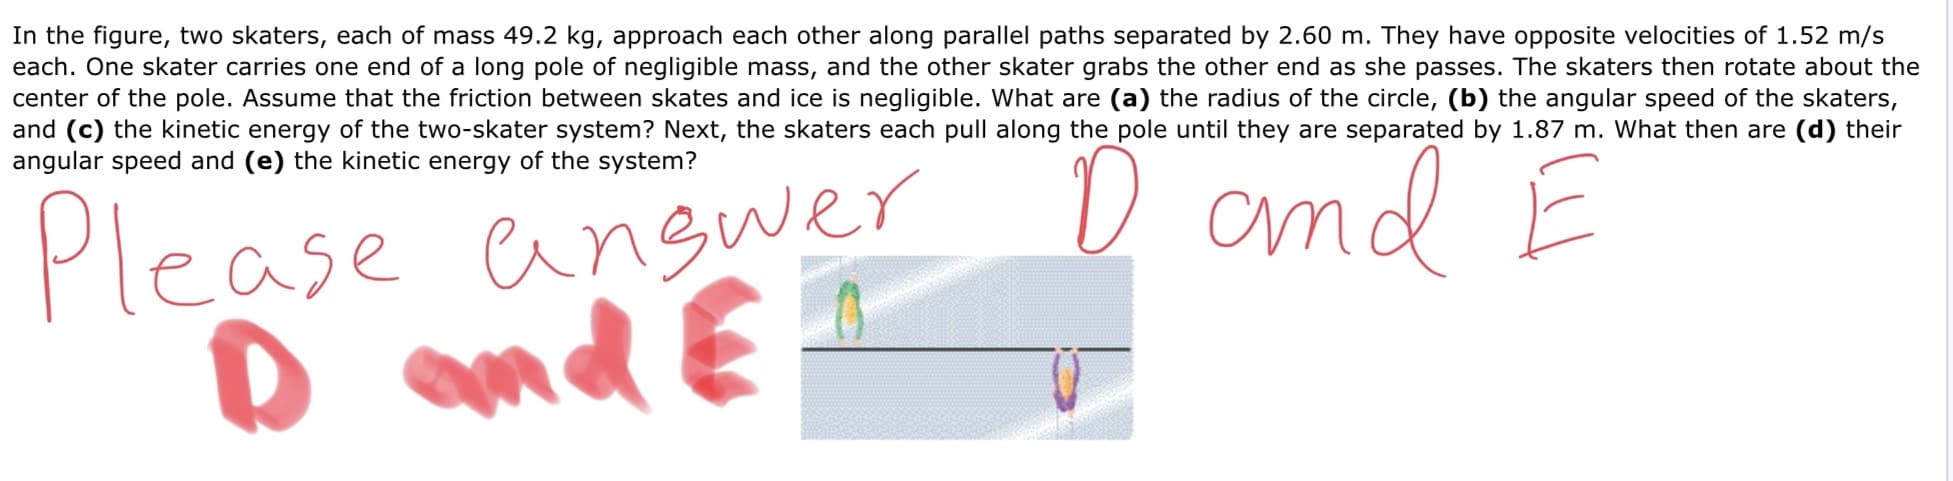 In the figure, two skaters, each of mass 49.2 kg, approach each other along parallel paths separated by 2.60 m. They have opposite velocities of 1.52 m/s
each. One skater carries one end of a long pole of negligible mass, and the other skater grabs the other end as she passes. The skaters then rotate about the
center of the pole. Assume that the friction between skates and ice is negligible. What are (a) the radius of the circle, (b) the angular speed of the skaters,
and (c) the kinetic energy of the two-skater system? Next, the skaters each pull along the pole until they are separated by 1.87 m. What then are (d) their
D and E
angular speed and (e) the kinetic energy of the system?
Please angwer
